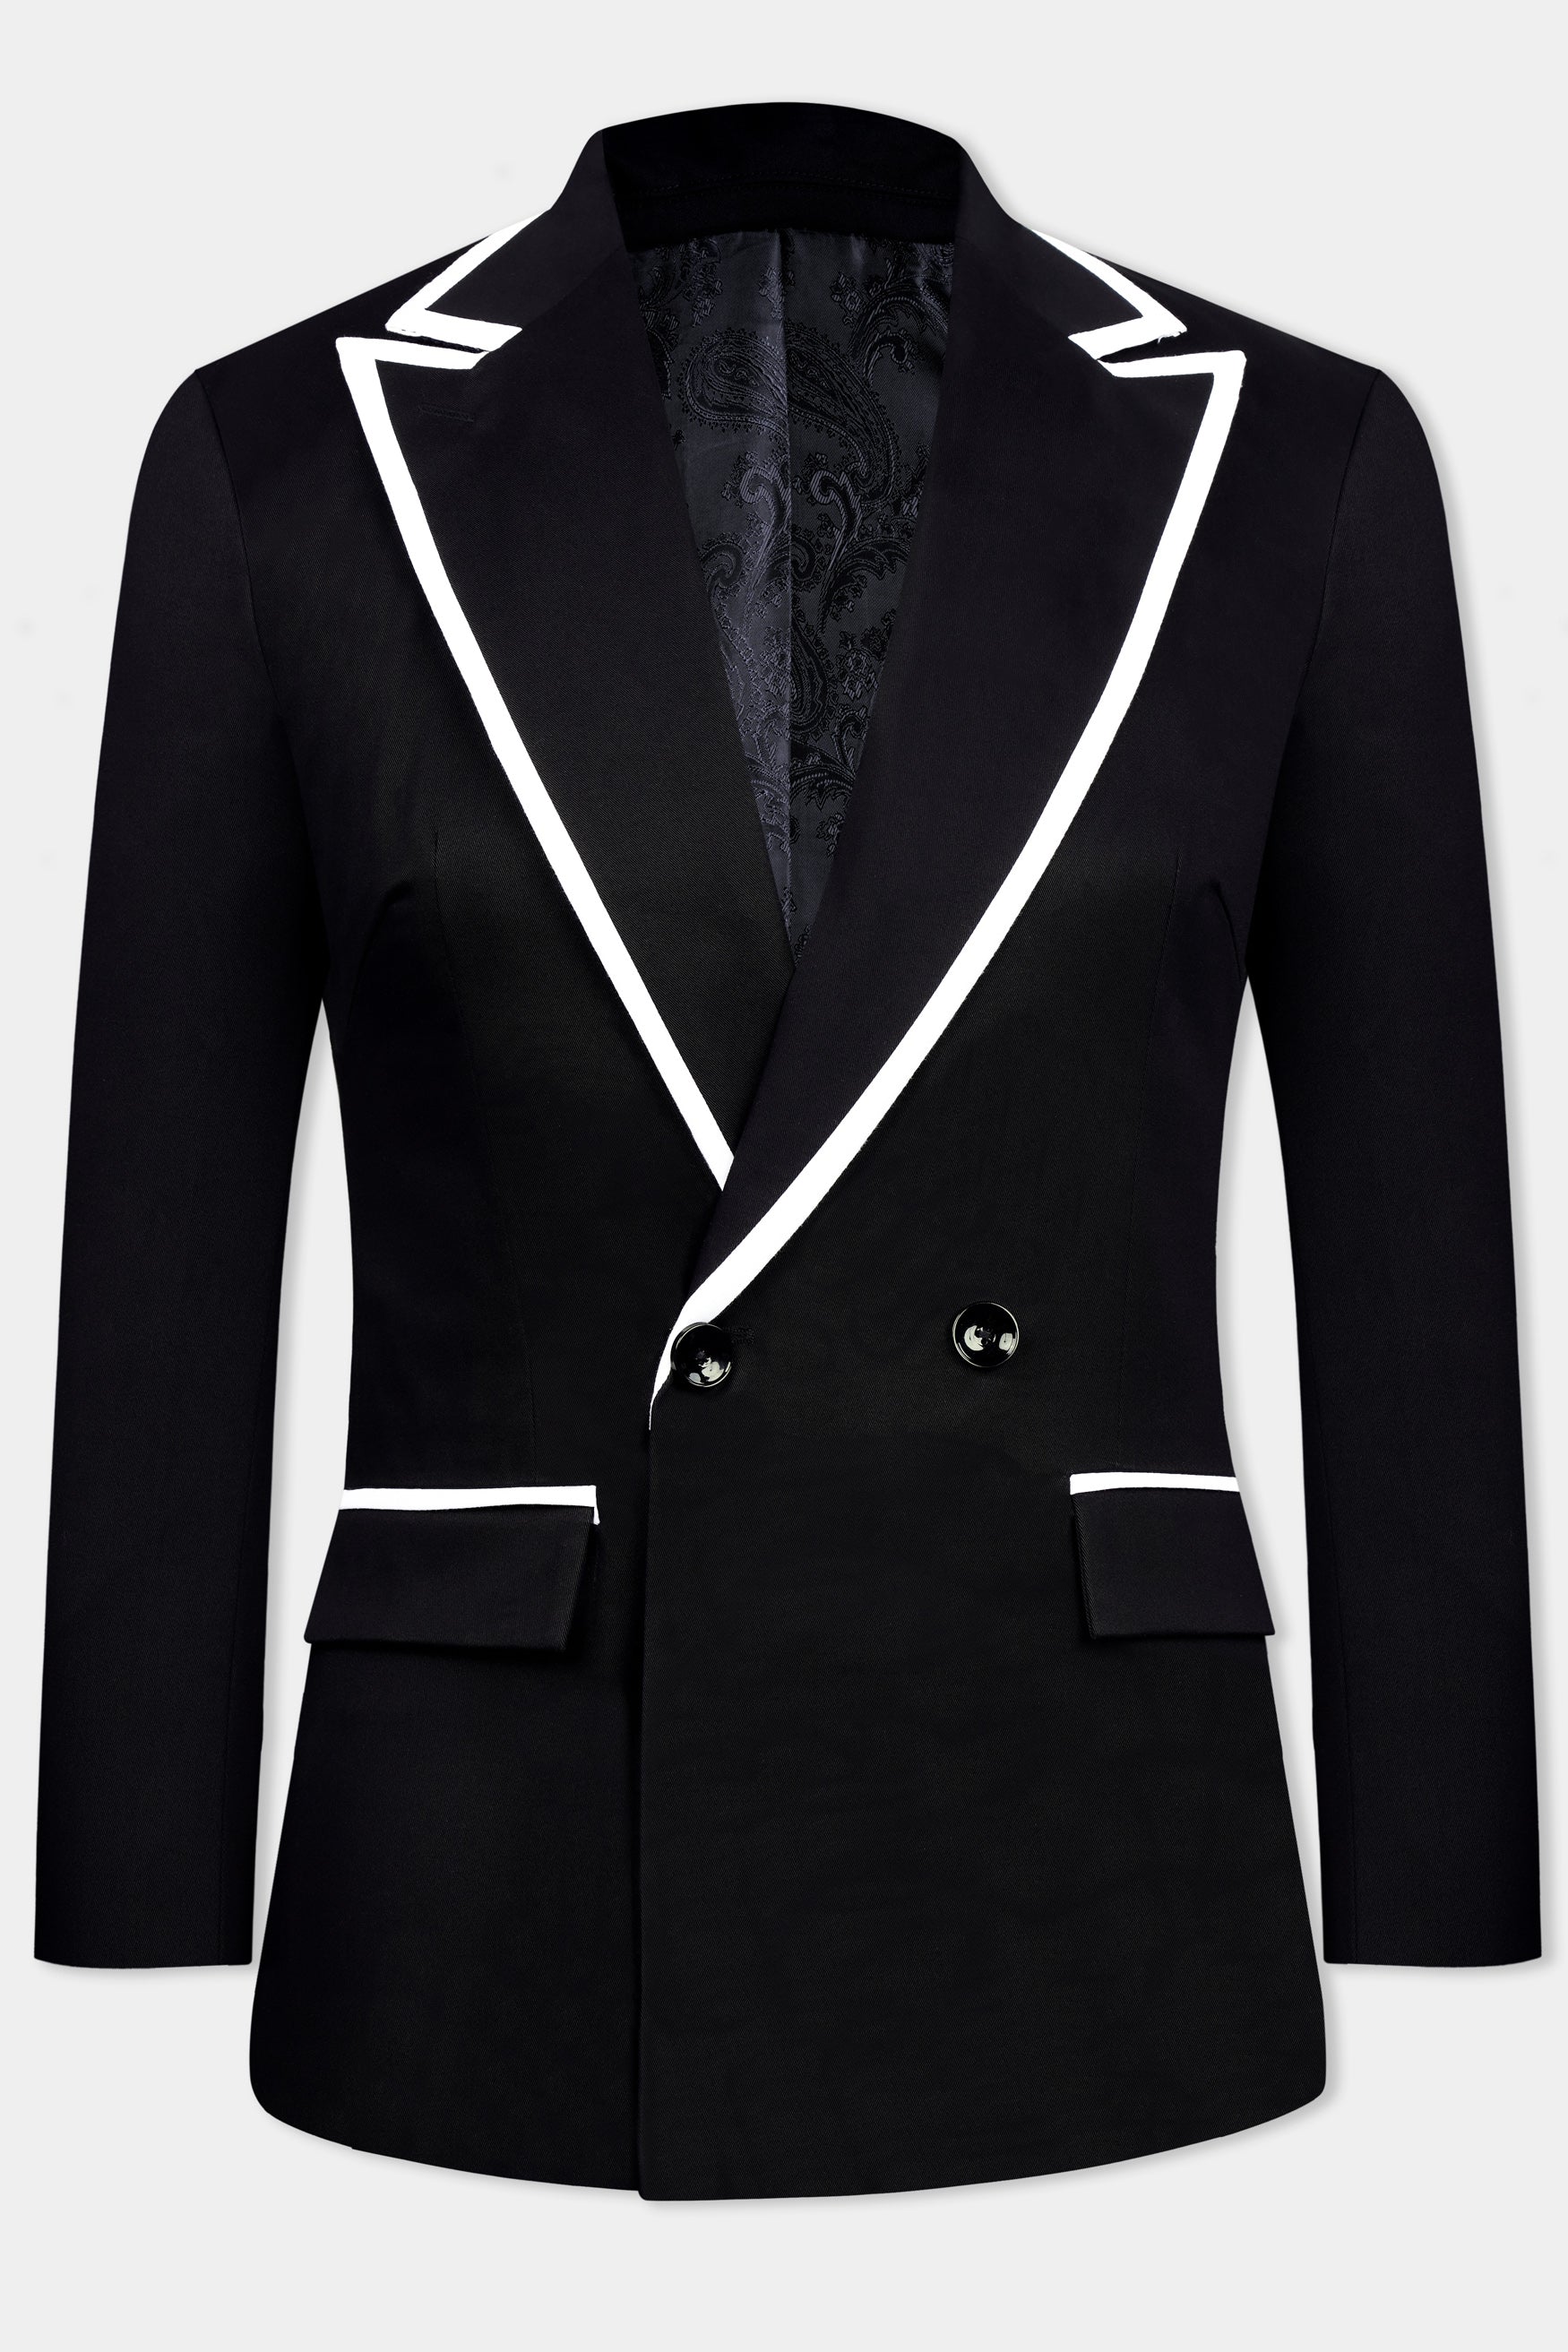 Jade Black With White Piping Work Wool Rich Double Breasted Women’s Designer Suit